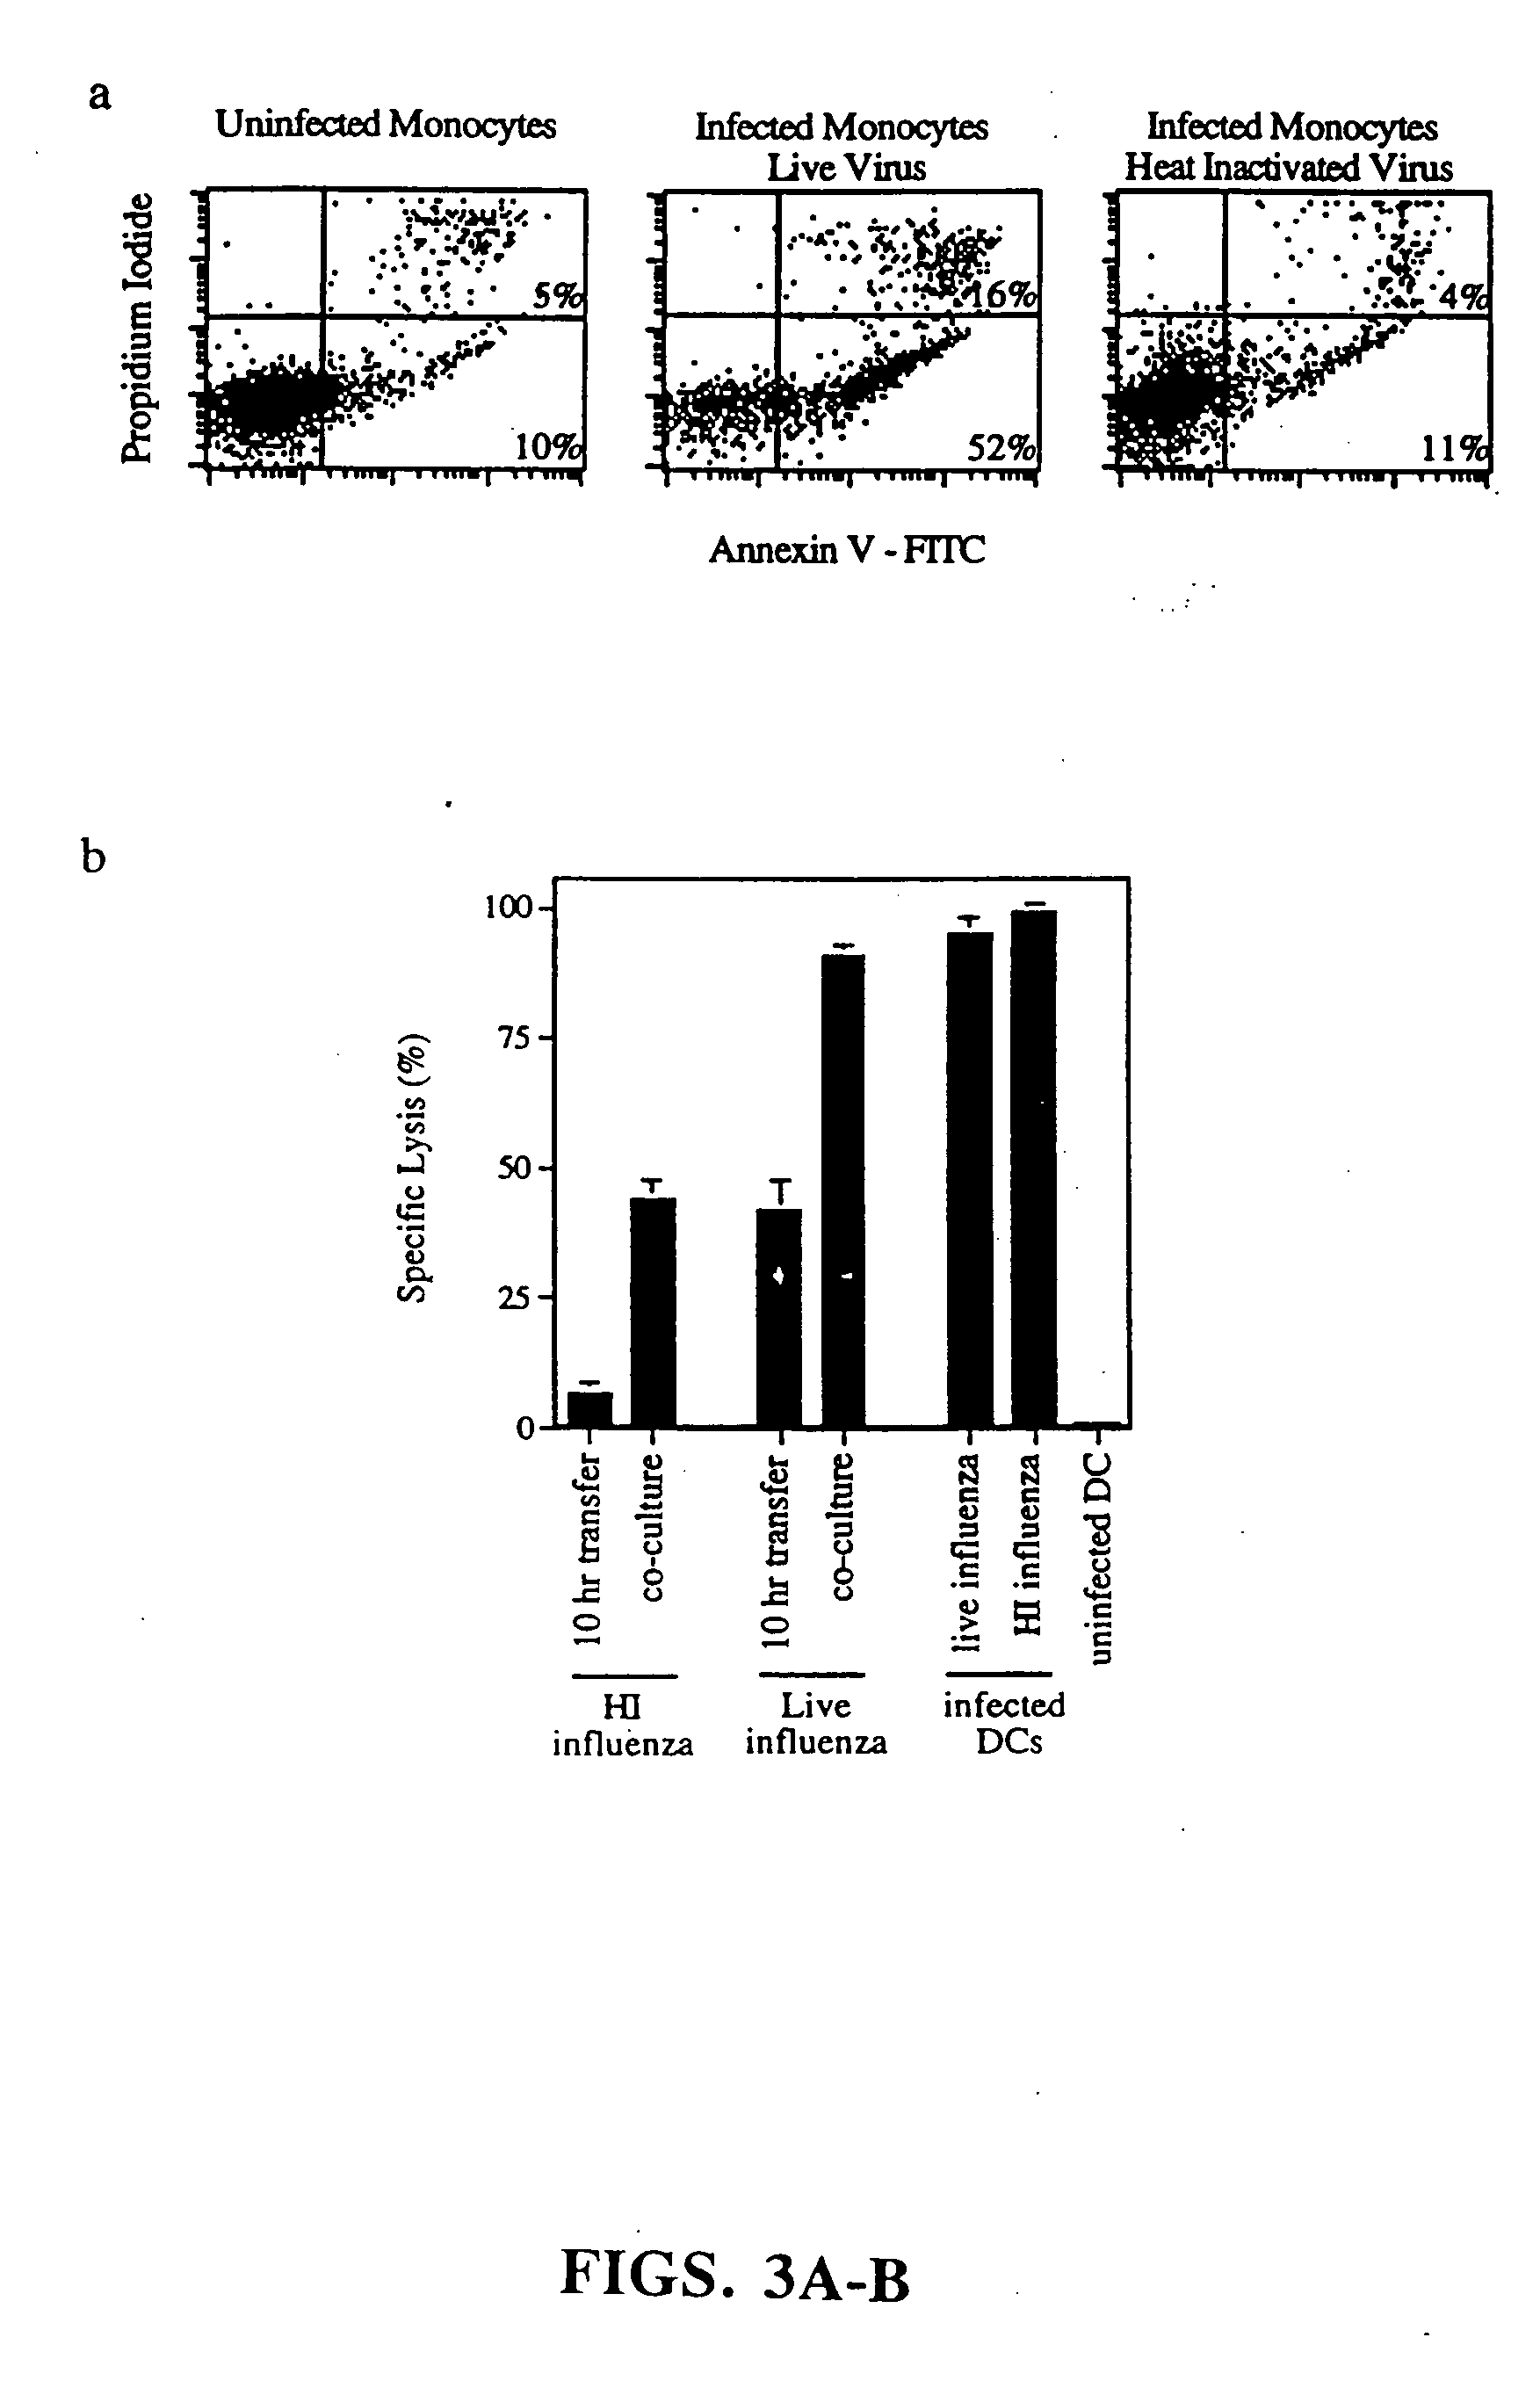 Methods for use of apoptotic cells to deliver antigen to dendritic cells for induction or tolerization of T cells